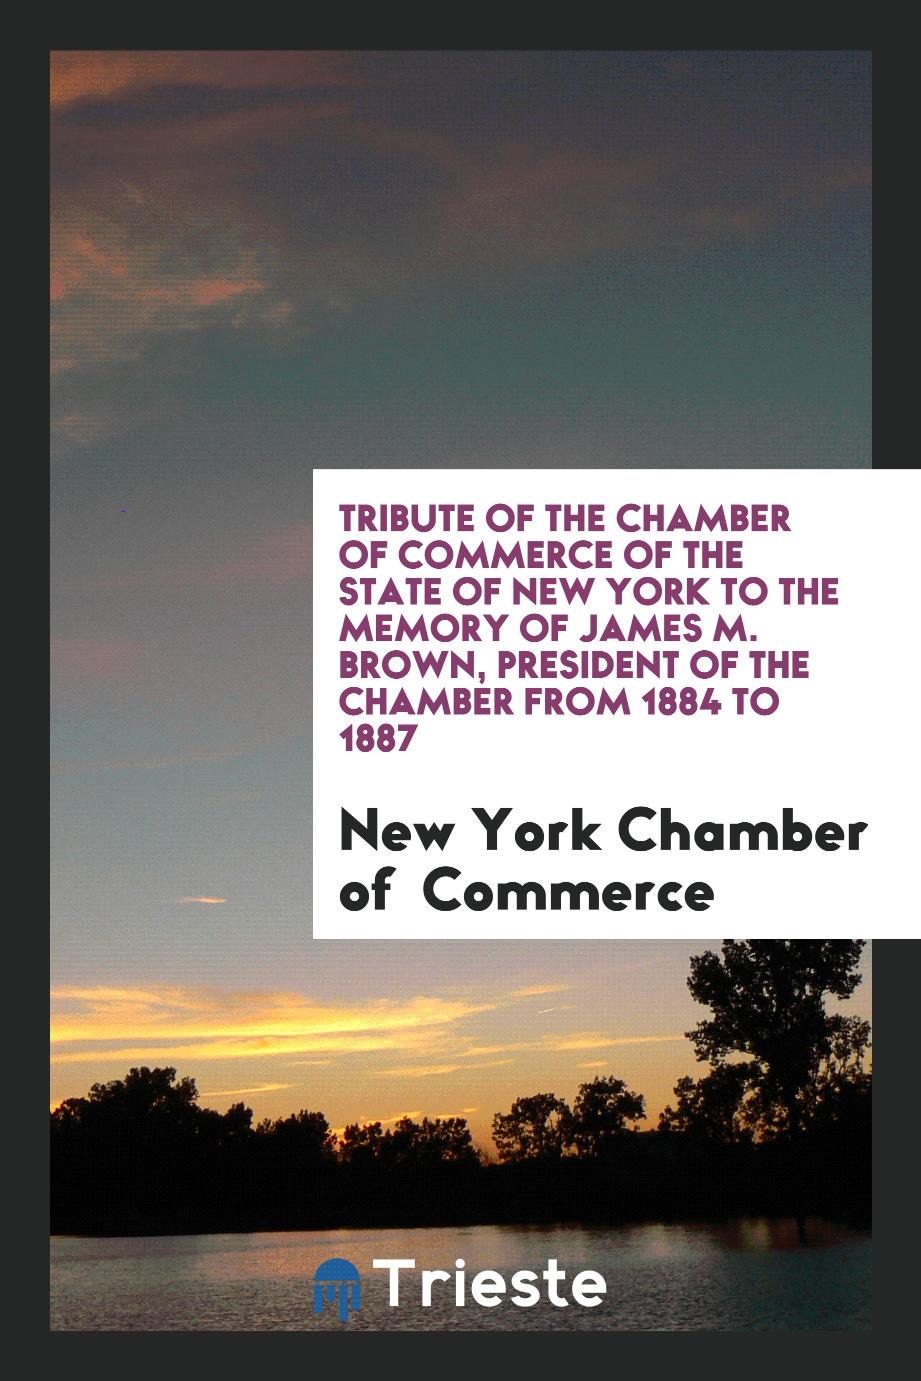 Tribute of the Chamber of commerce of the state of New York to the Memory of James M. Brown, President of the Chamber from 1884 to 1887